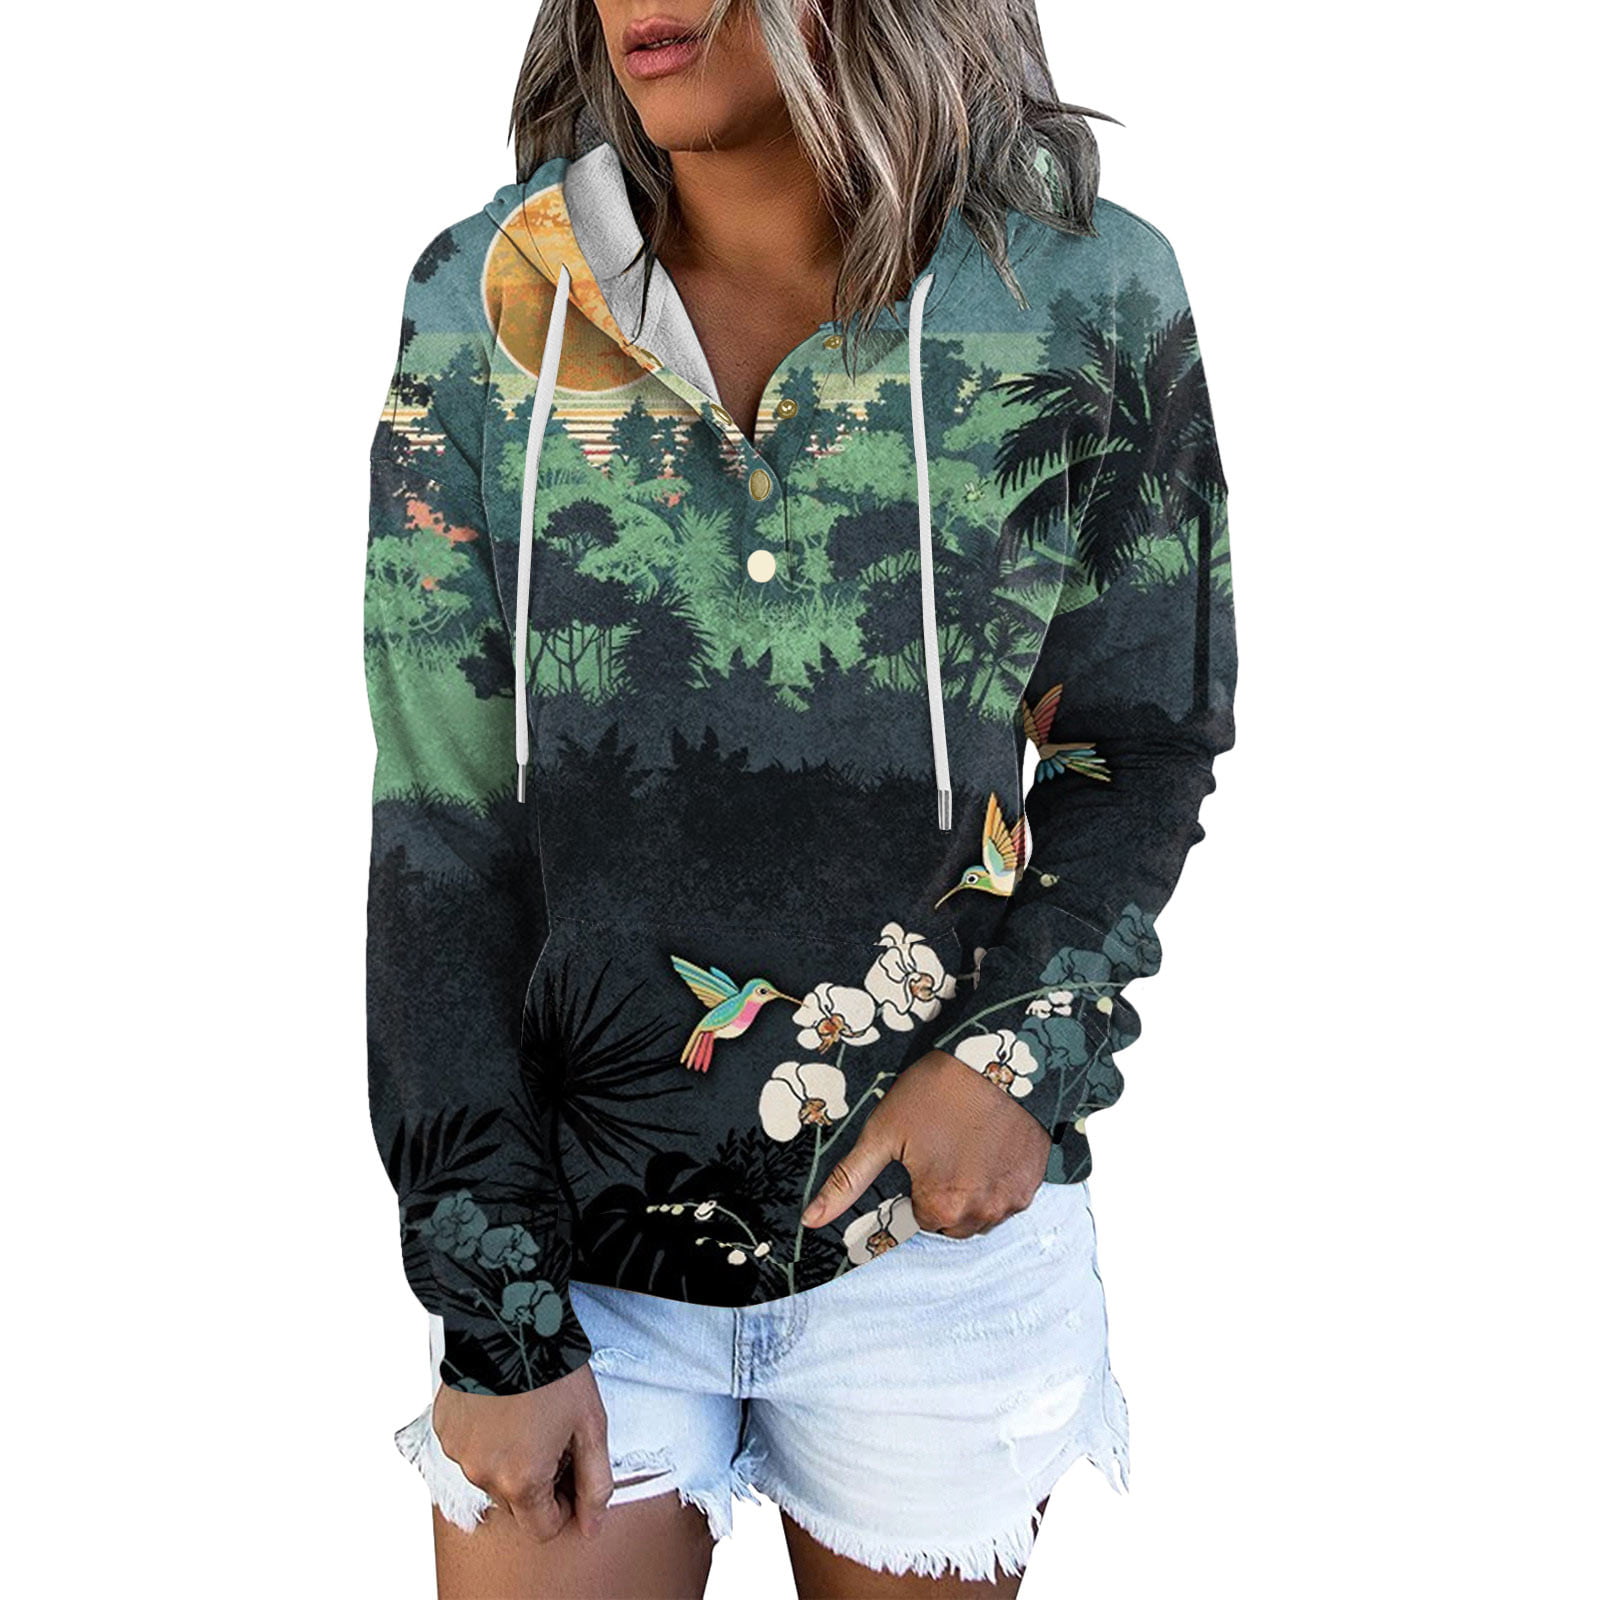 ketyyh-chn99 Designer Hoodies For Thin Zip-Up Hoodie Jacket for with Plus Size - Walmart.com